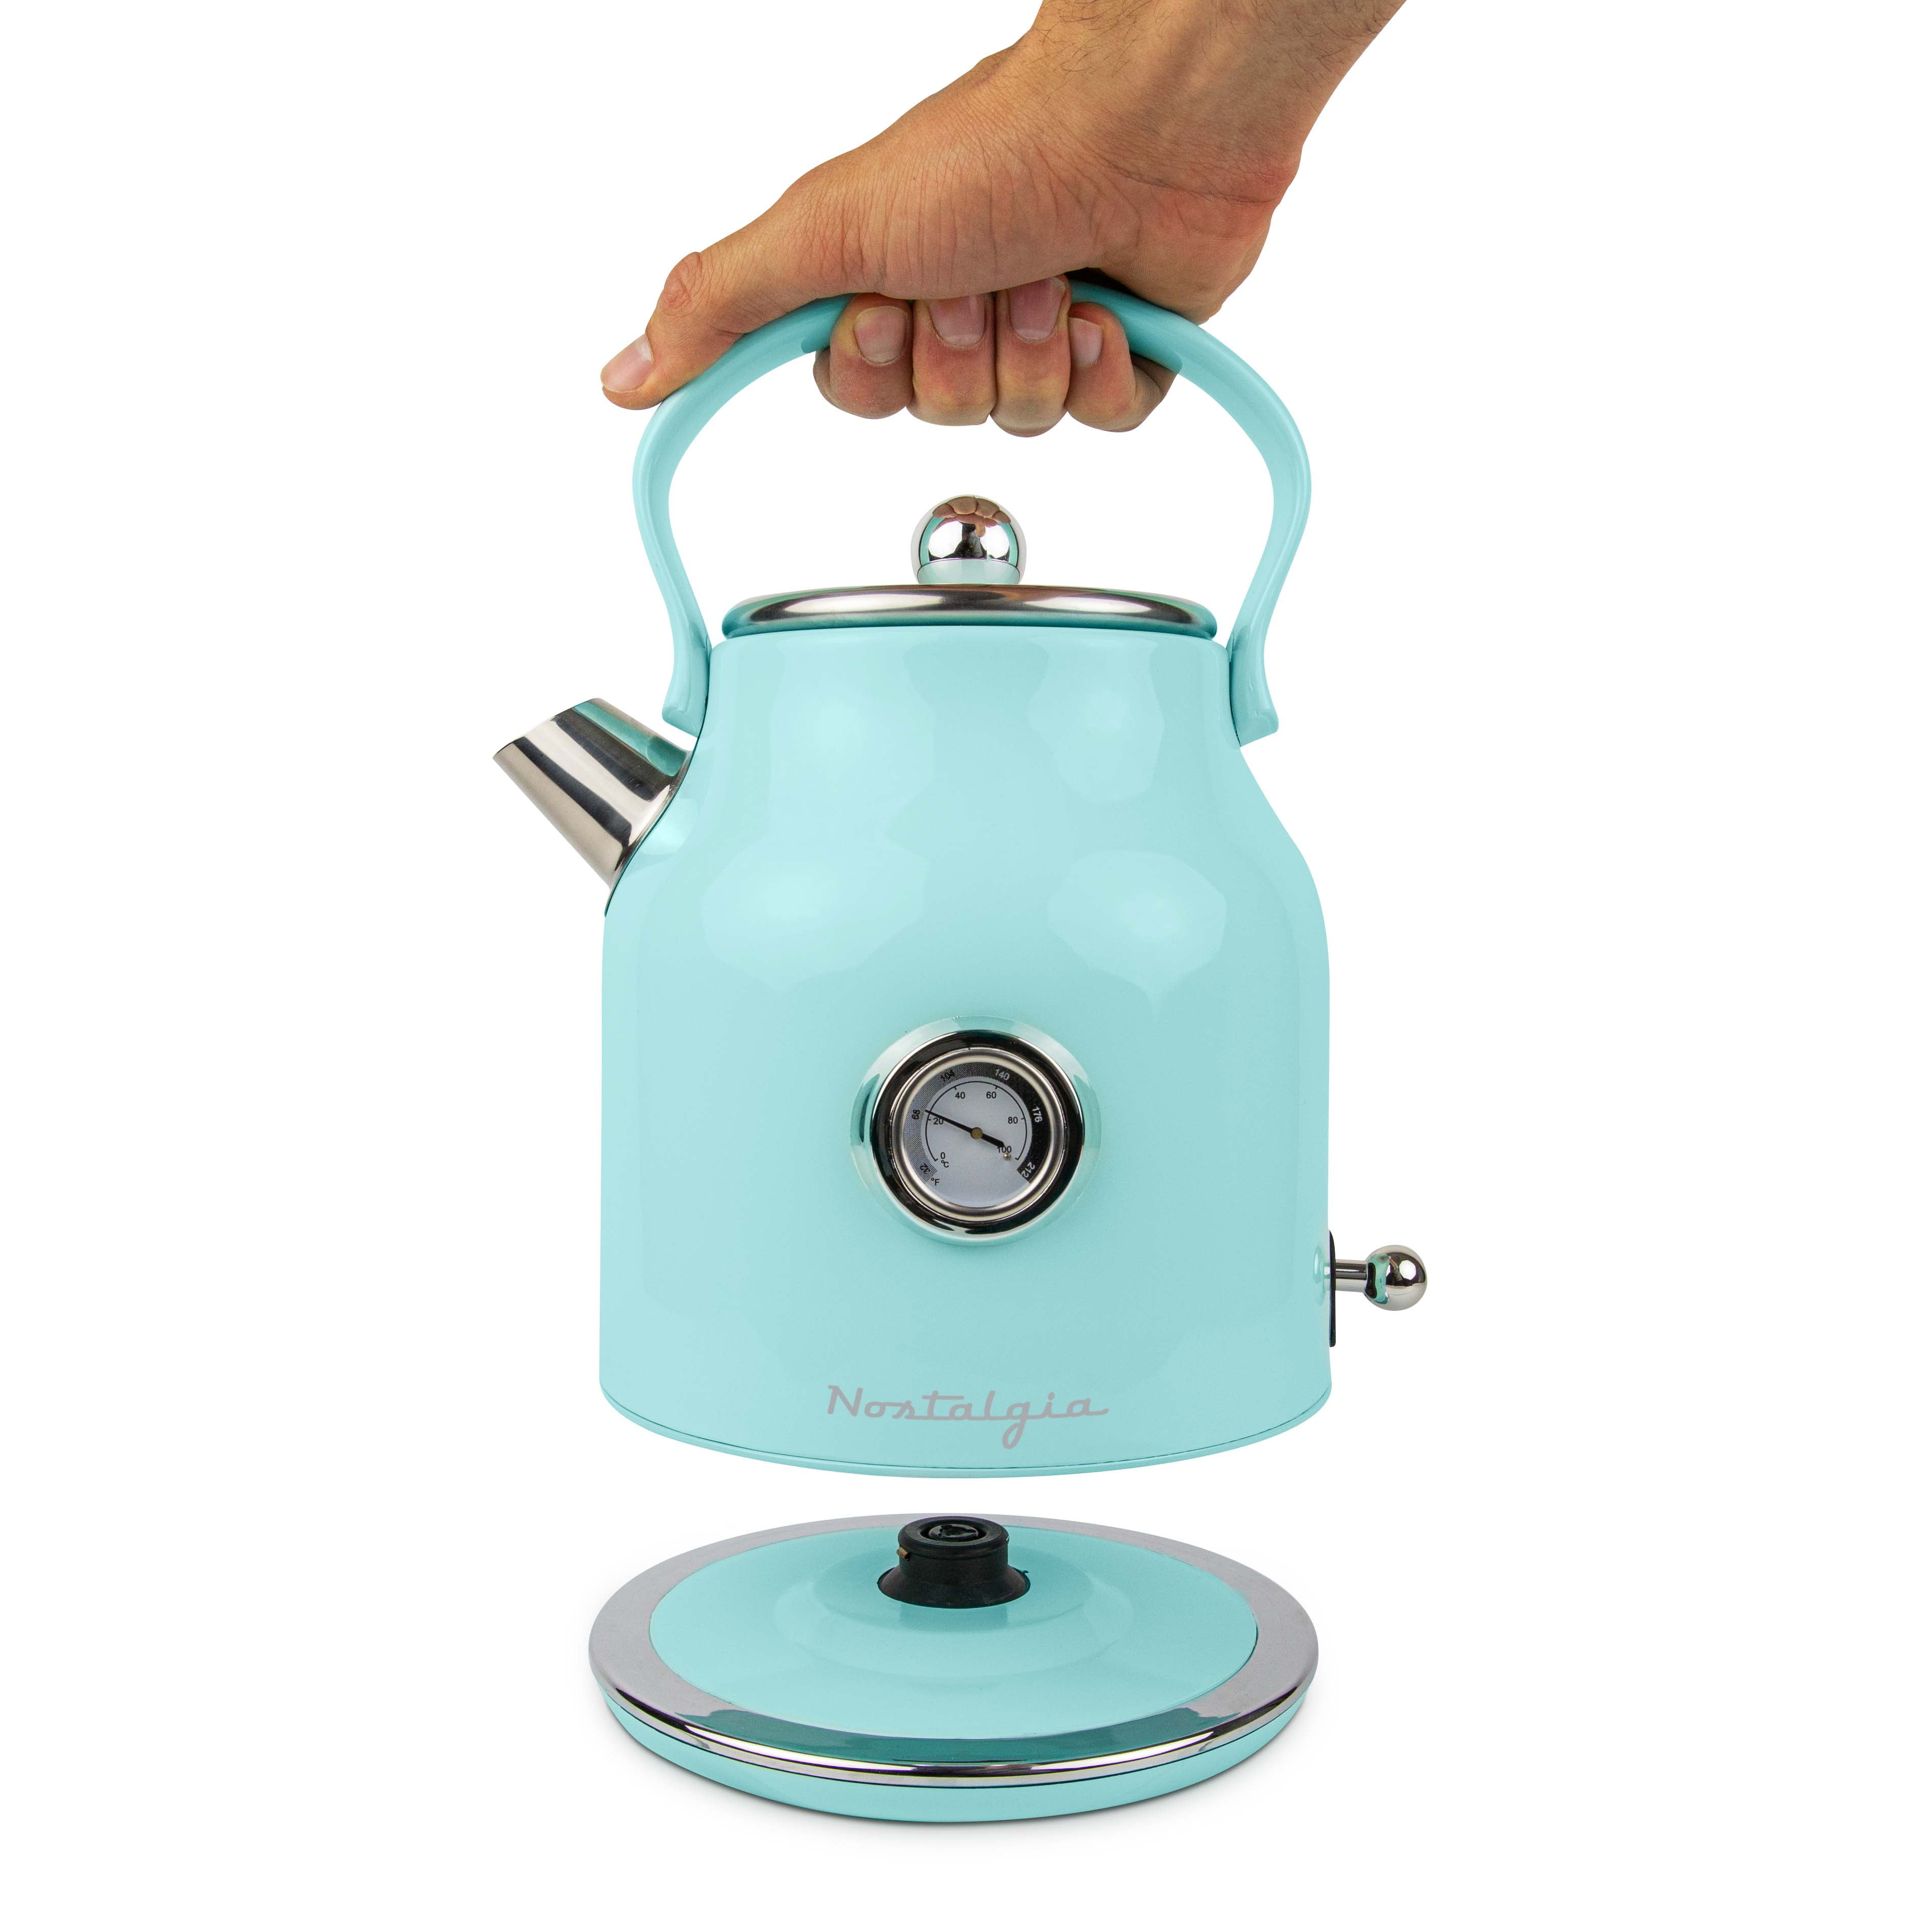 Something's brewing with this discounted retro electric kettle